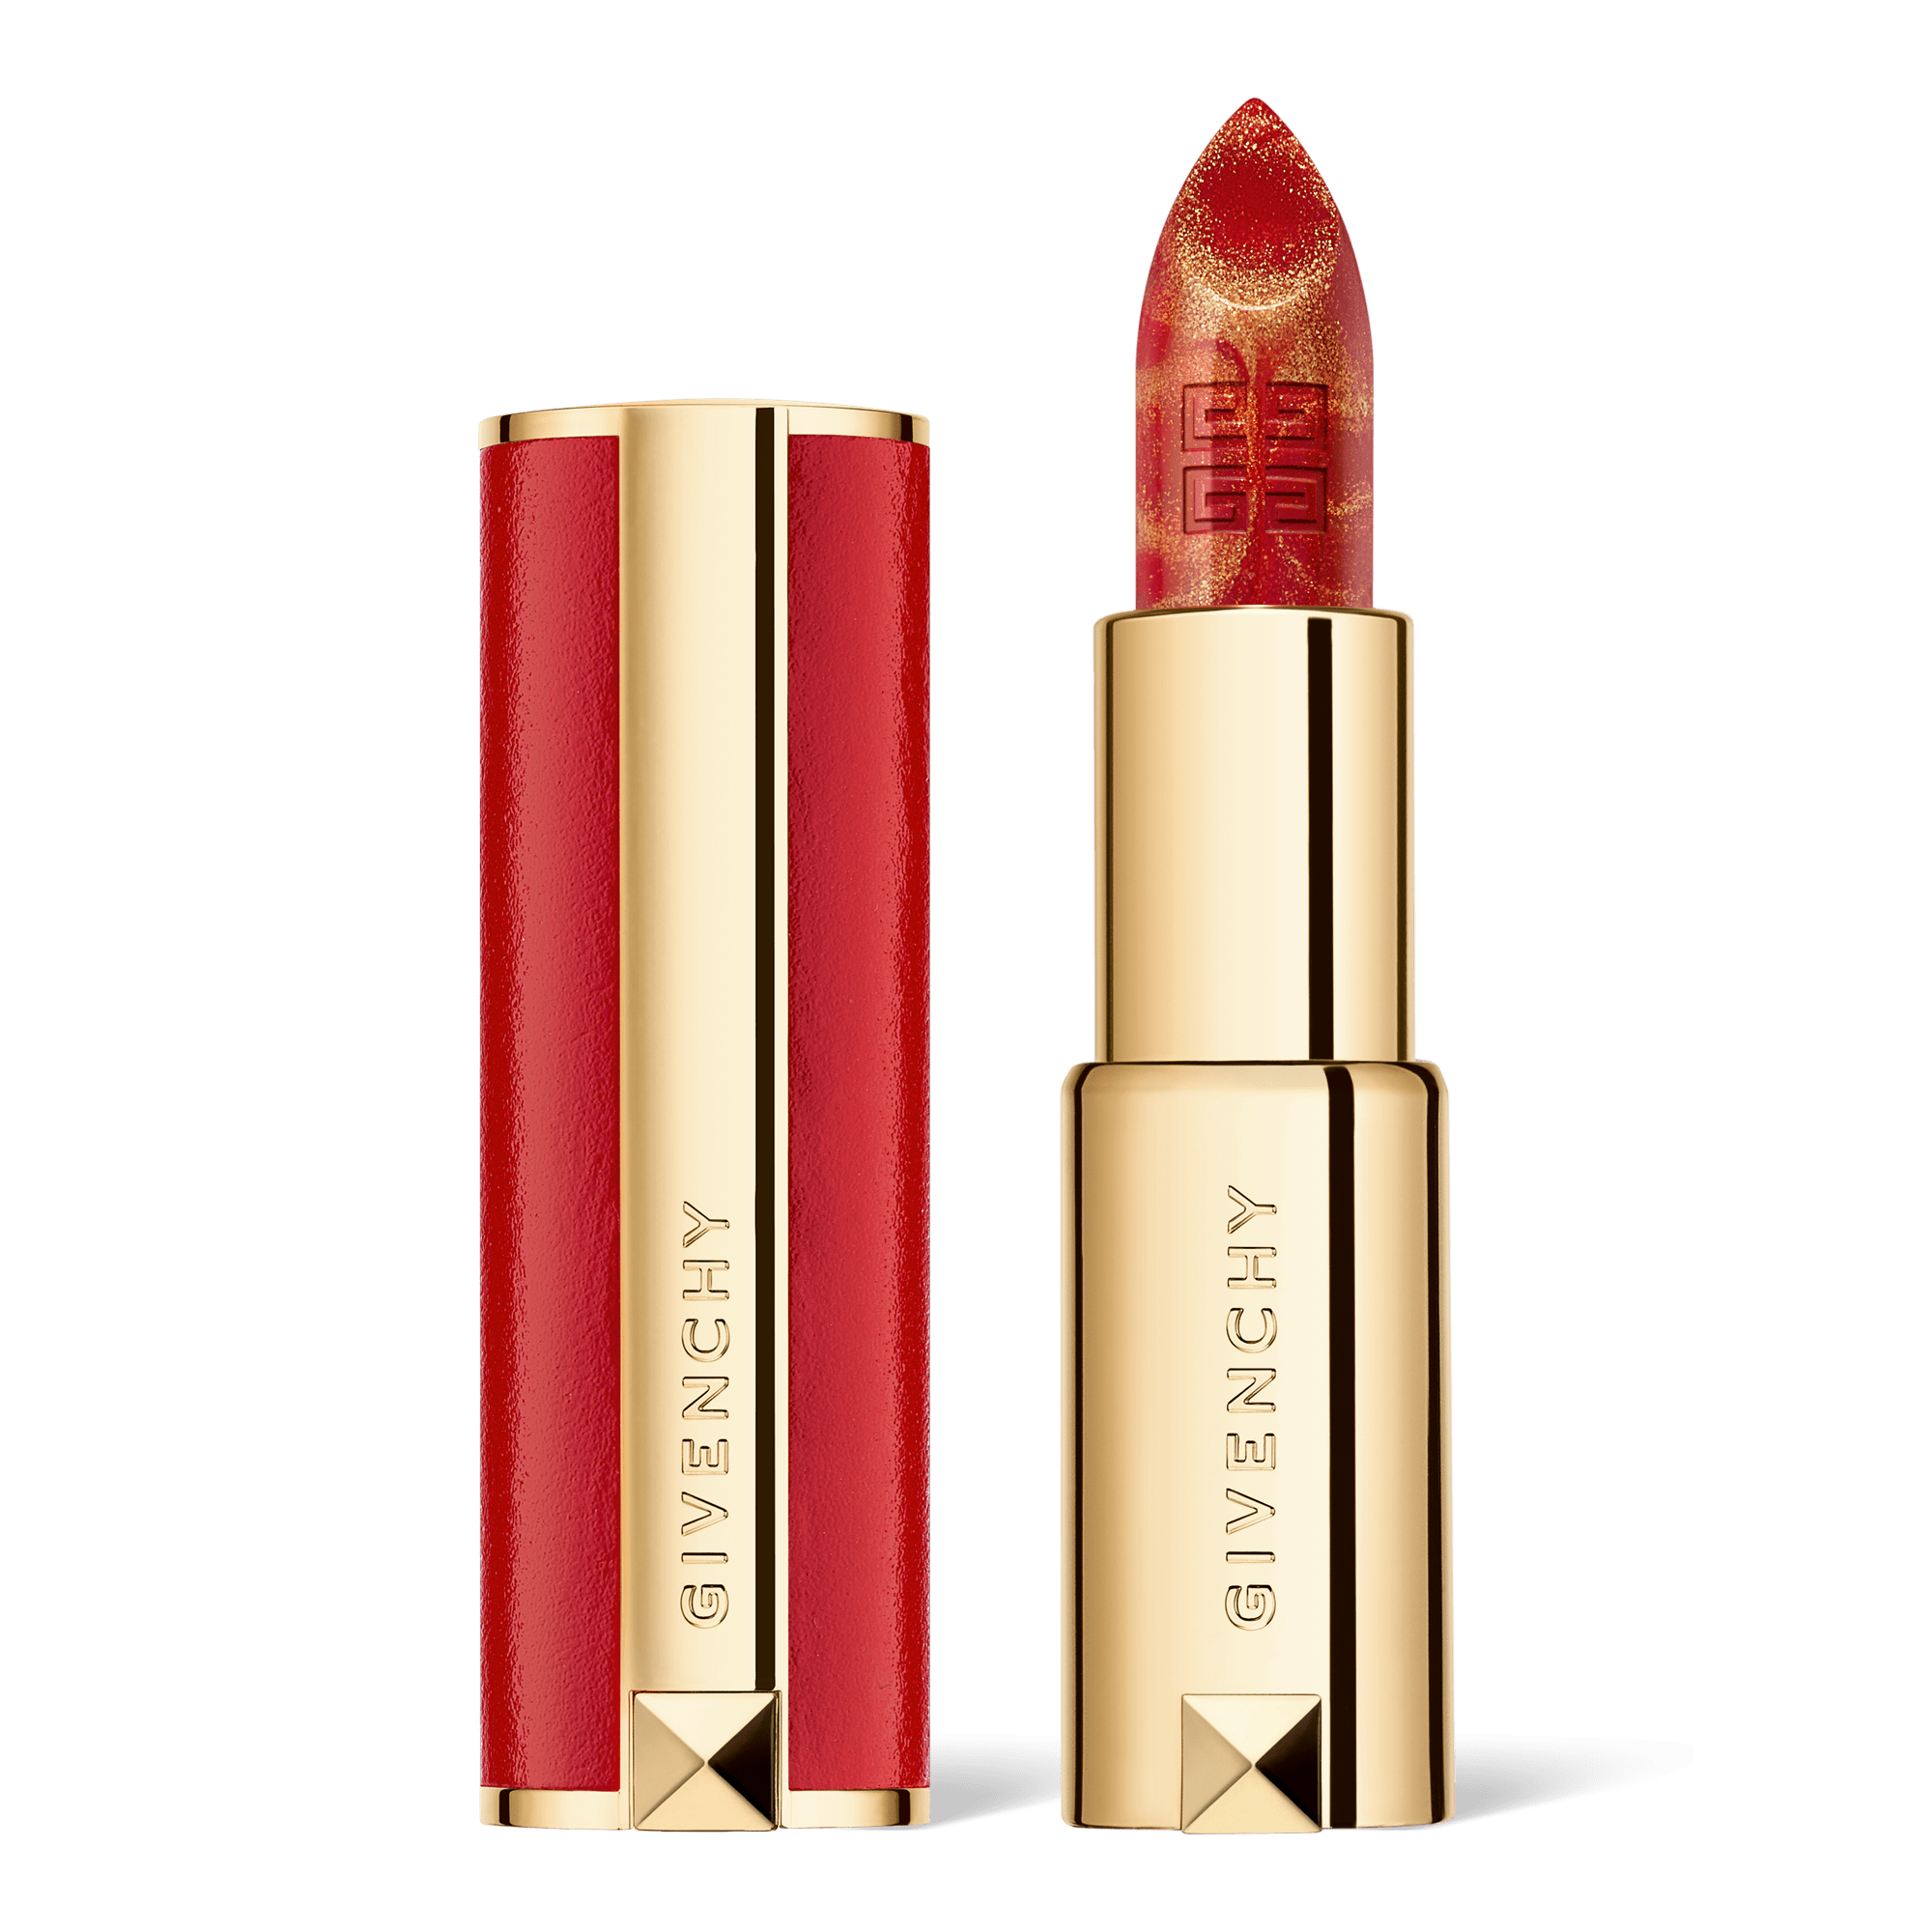 Givenchy CNY 2021 Le Rouge Marble Edition Lipstick, 888 Golden Red